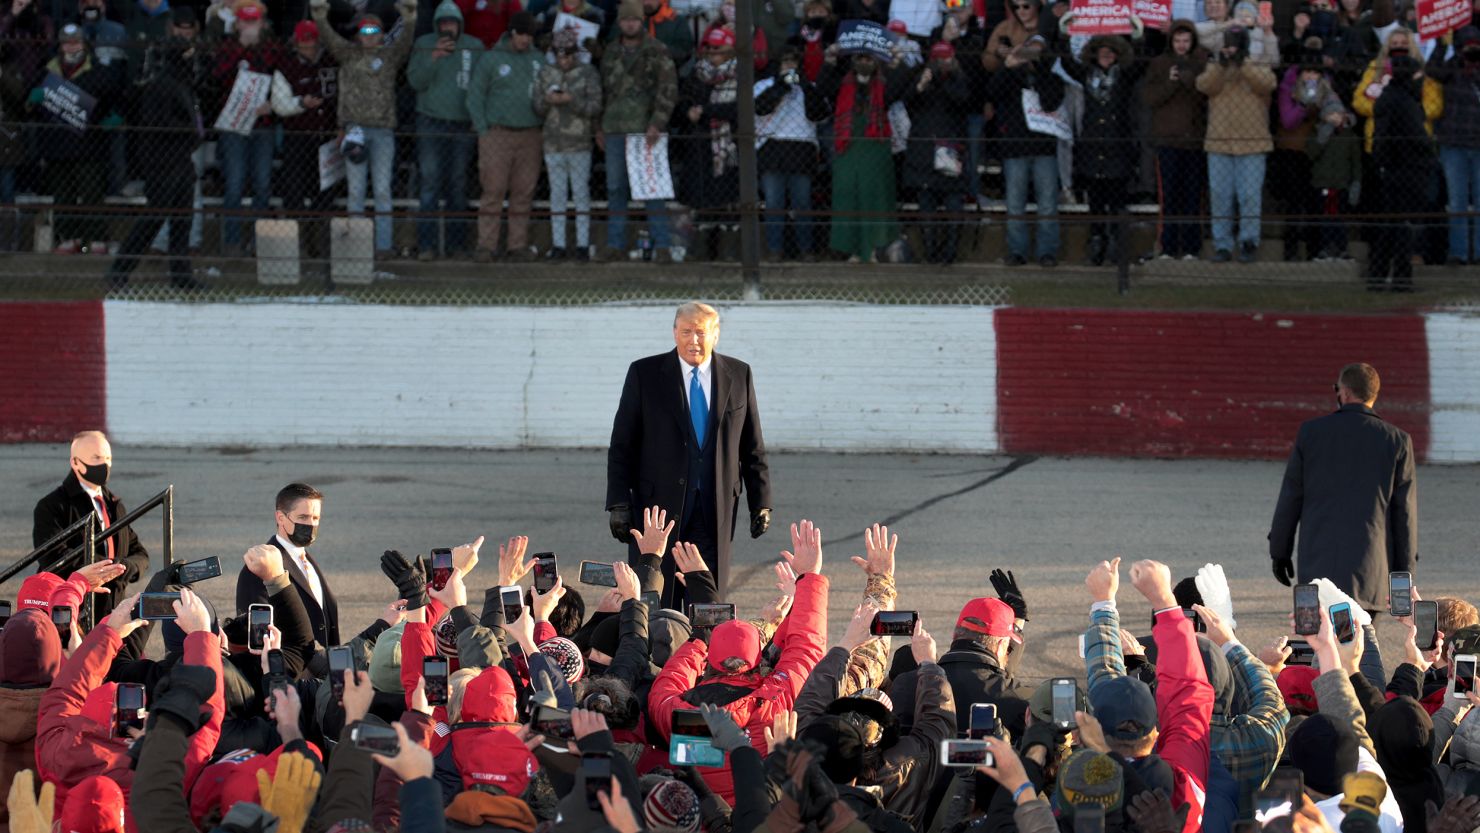 President Donald Trump arrives for a campaign rally at the LaCrosse Fairgrounds Speedway on October 27, 2020 in West Salem, Wisconsin.